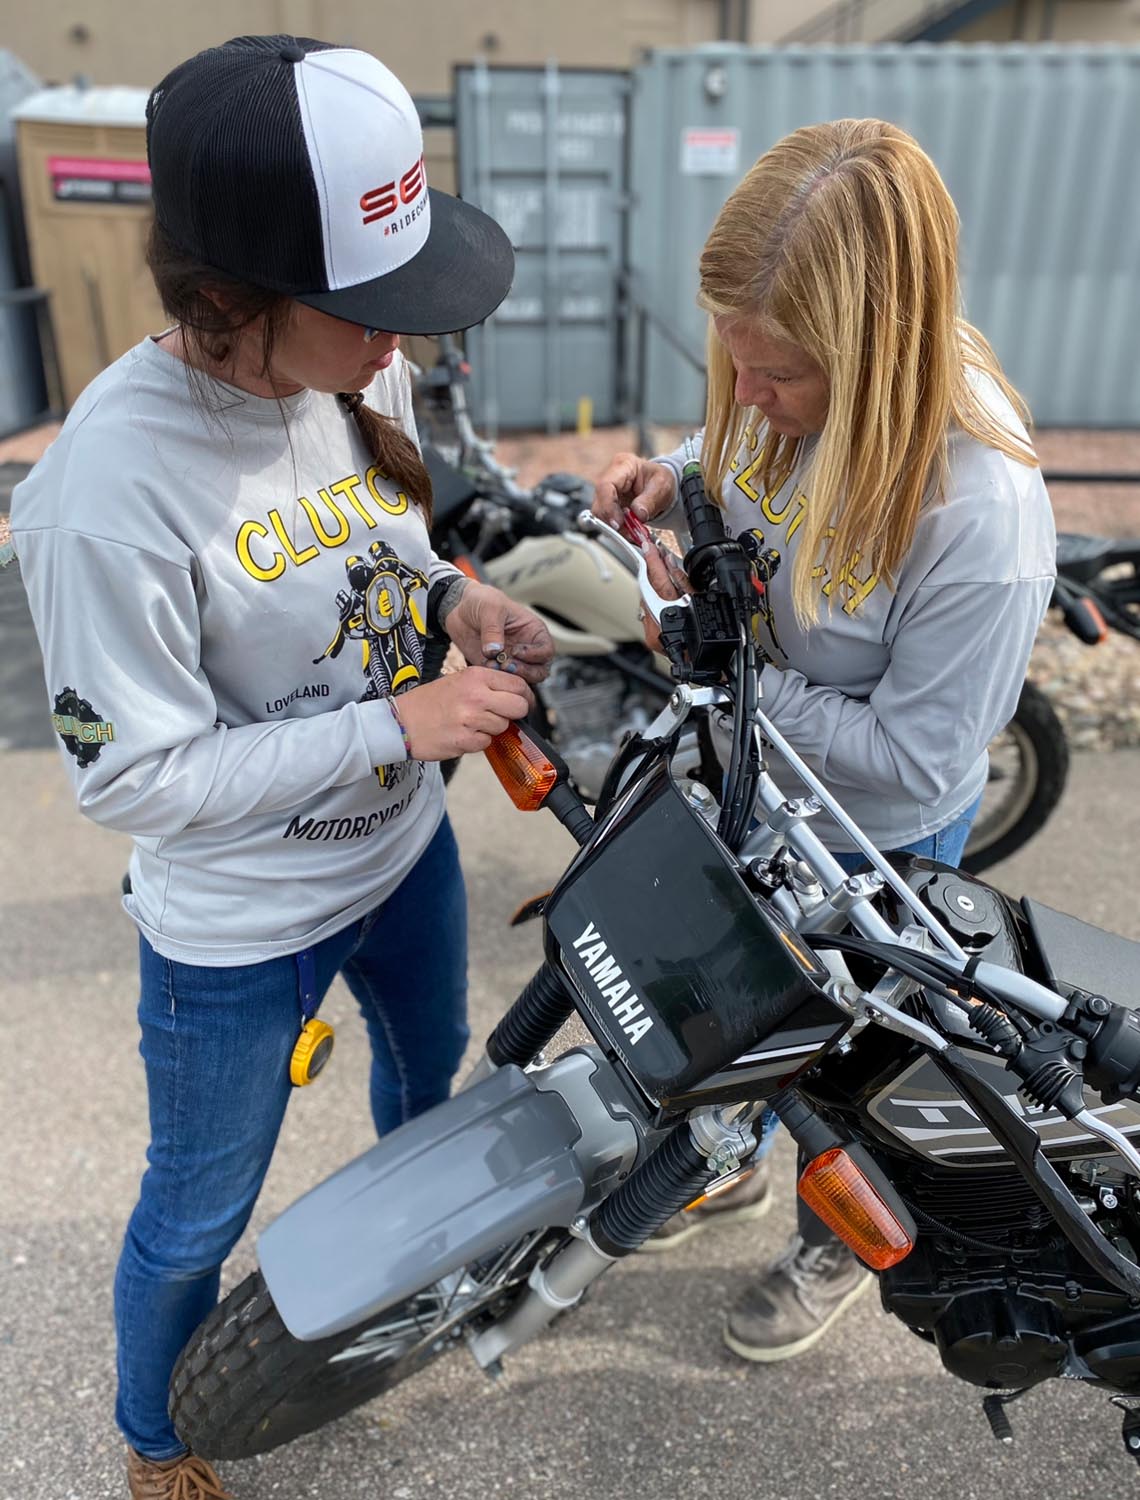 Piper and one of her employees do some maintenance on one of her school’s motorcycles.